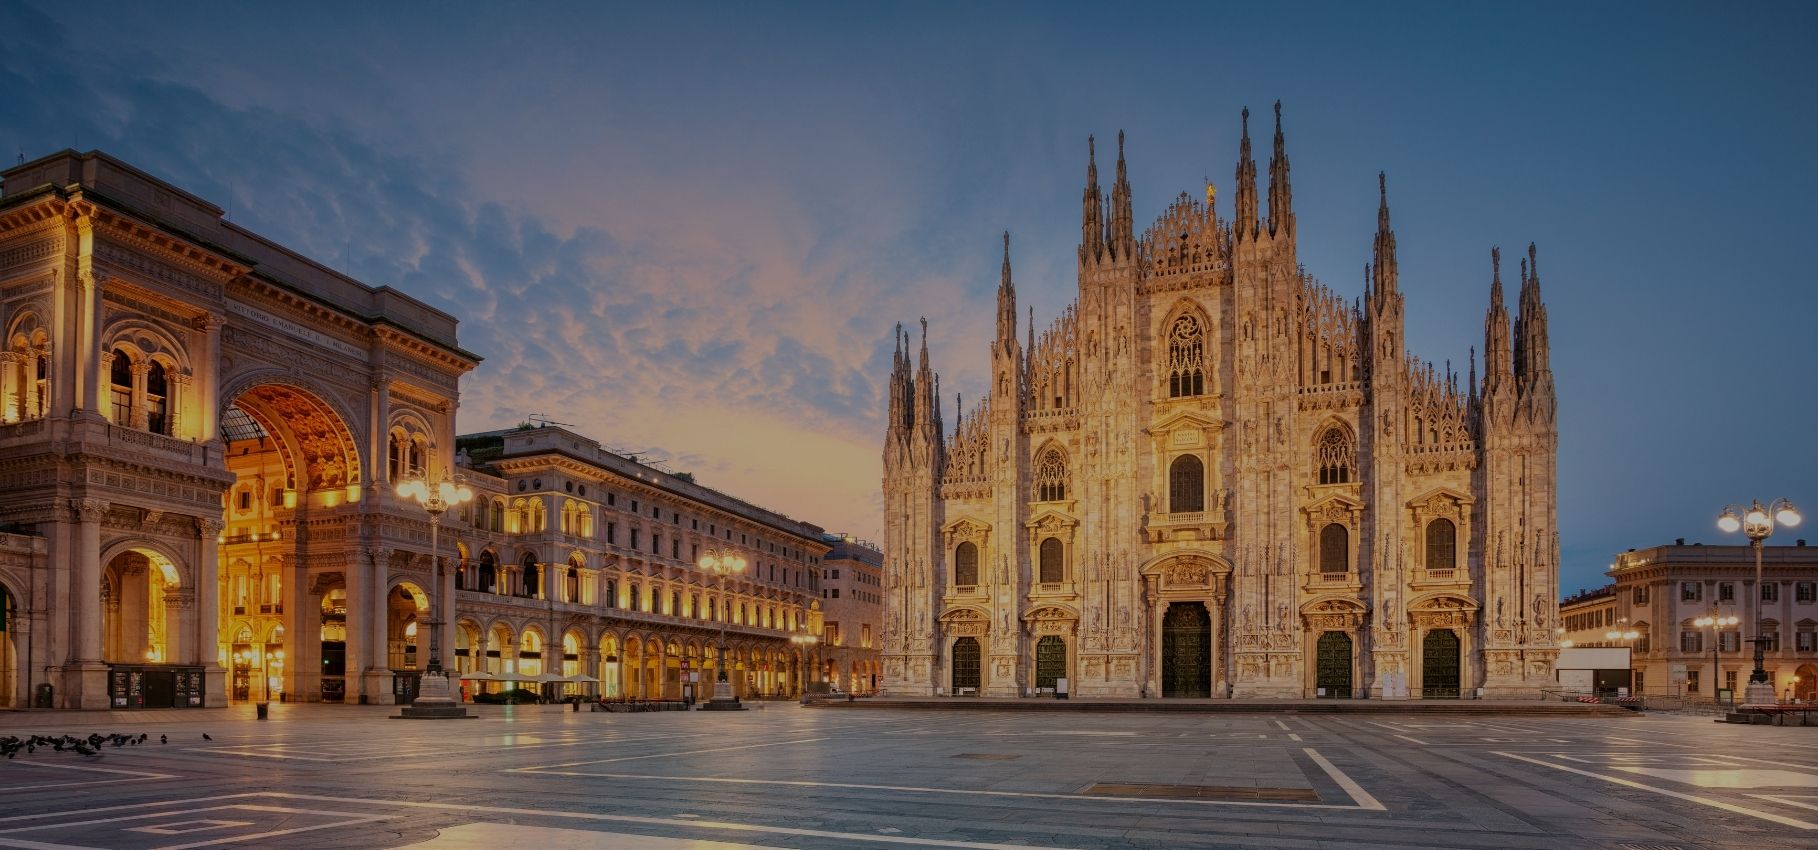 The Best things to do in Milan, Italy